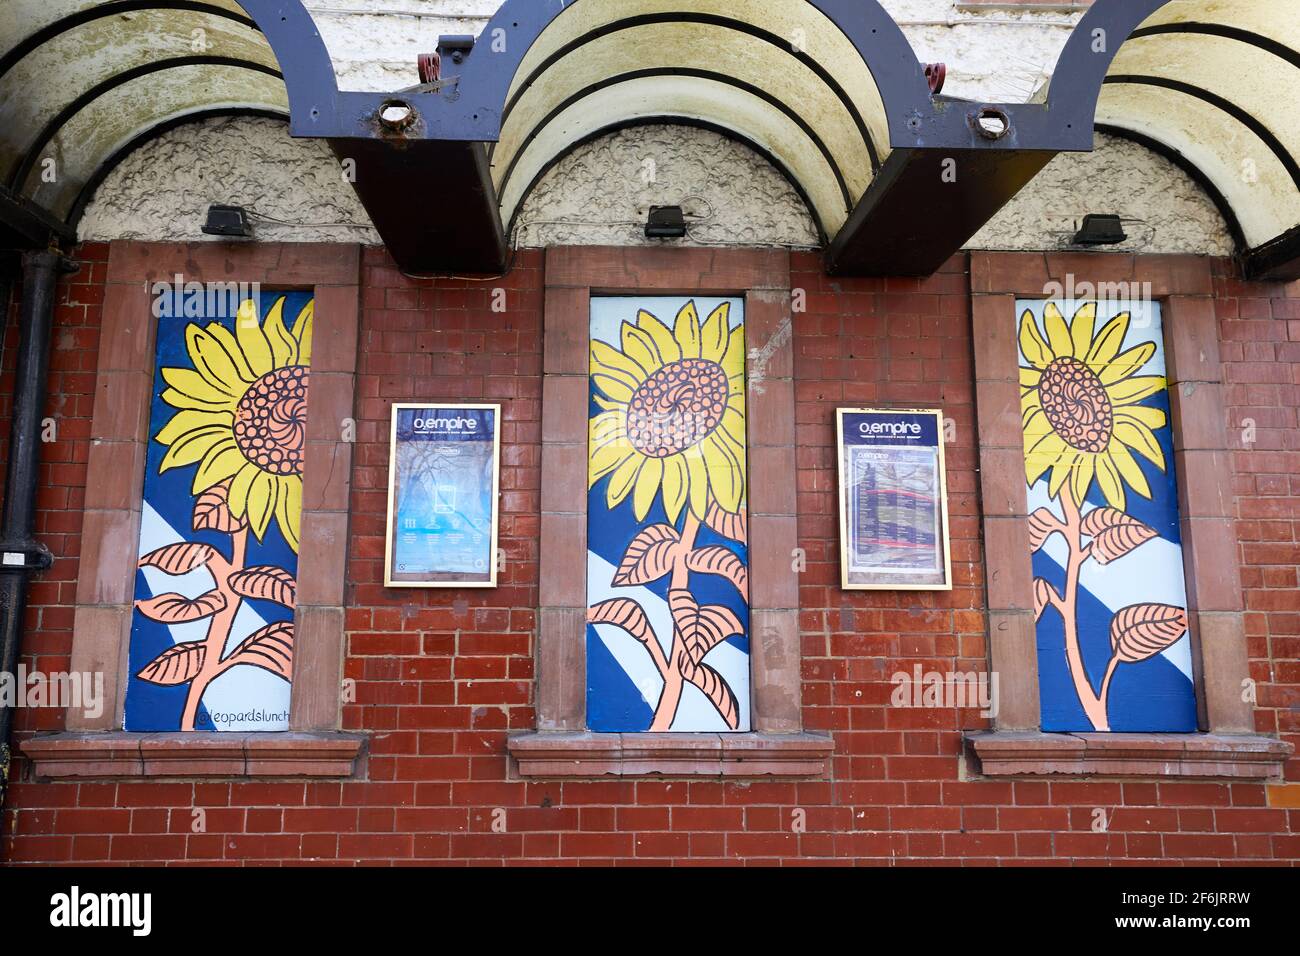 London, UK - 30 Mar 2021: The exterior of the O2 Empire Shepherd's Bush, whose doors and booking hall windows have recently been decorated in a mural by Arlo Parks in aid of Women's History Month. Stock Photo